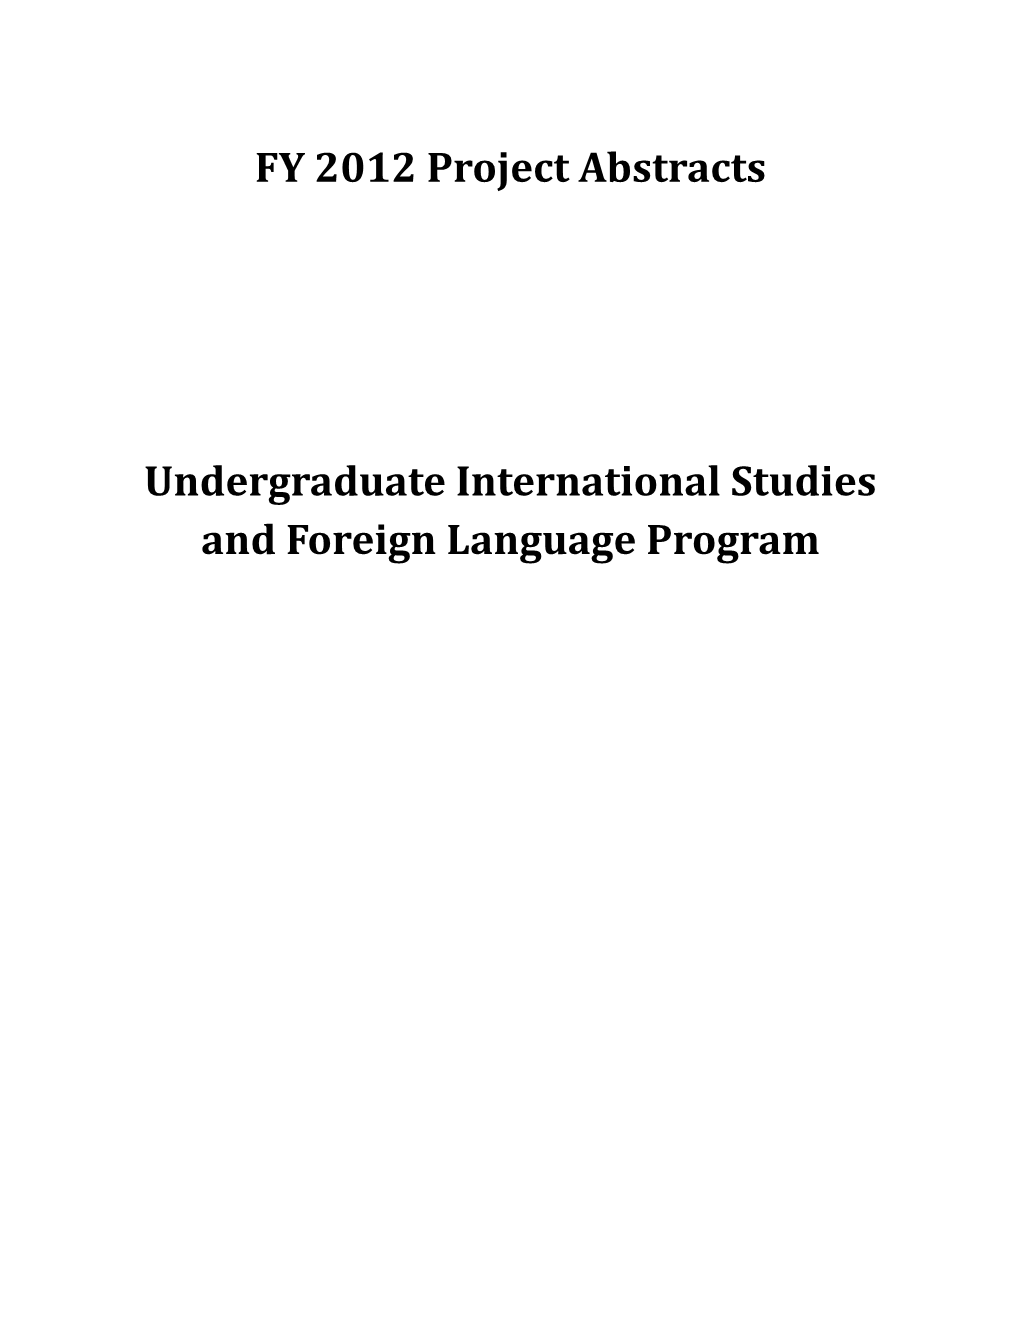 FY 2012 Project Abstracts for the Undergraduate International Studies and Foreign Language